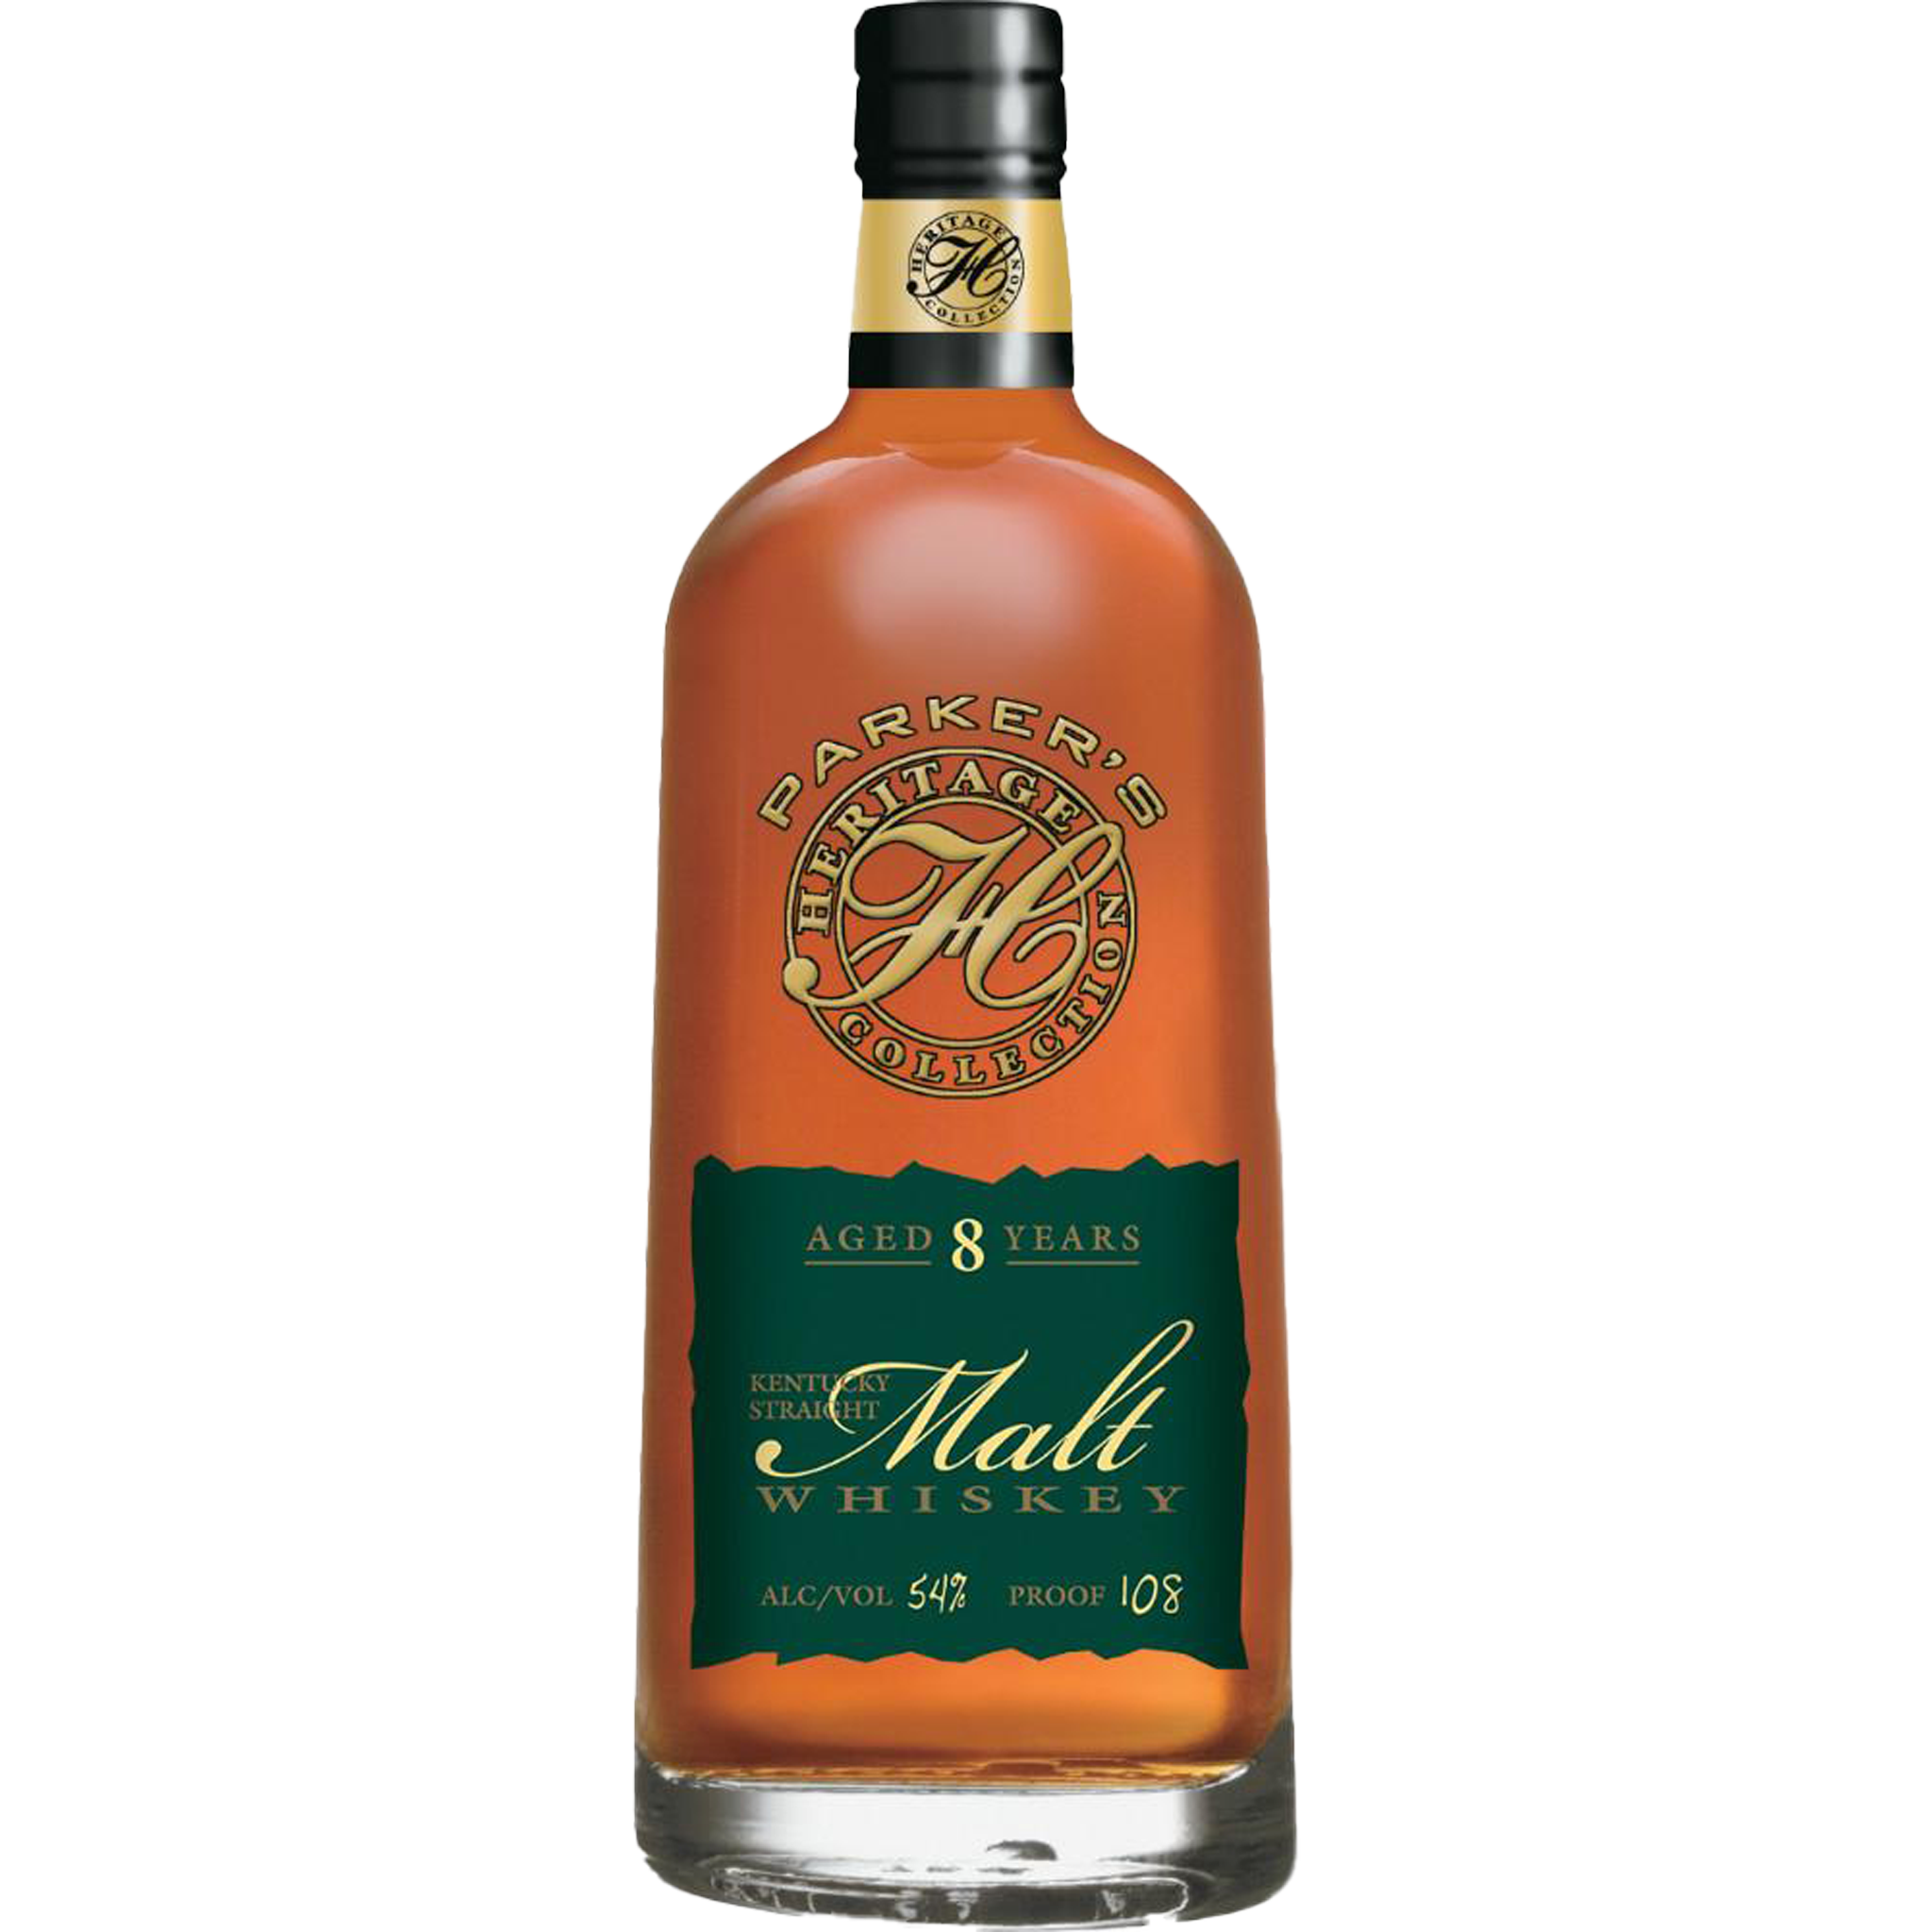 Parkers Heritage Collection Aged 8 Years Malt Whiskey